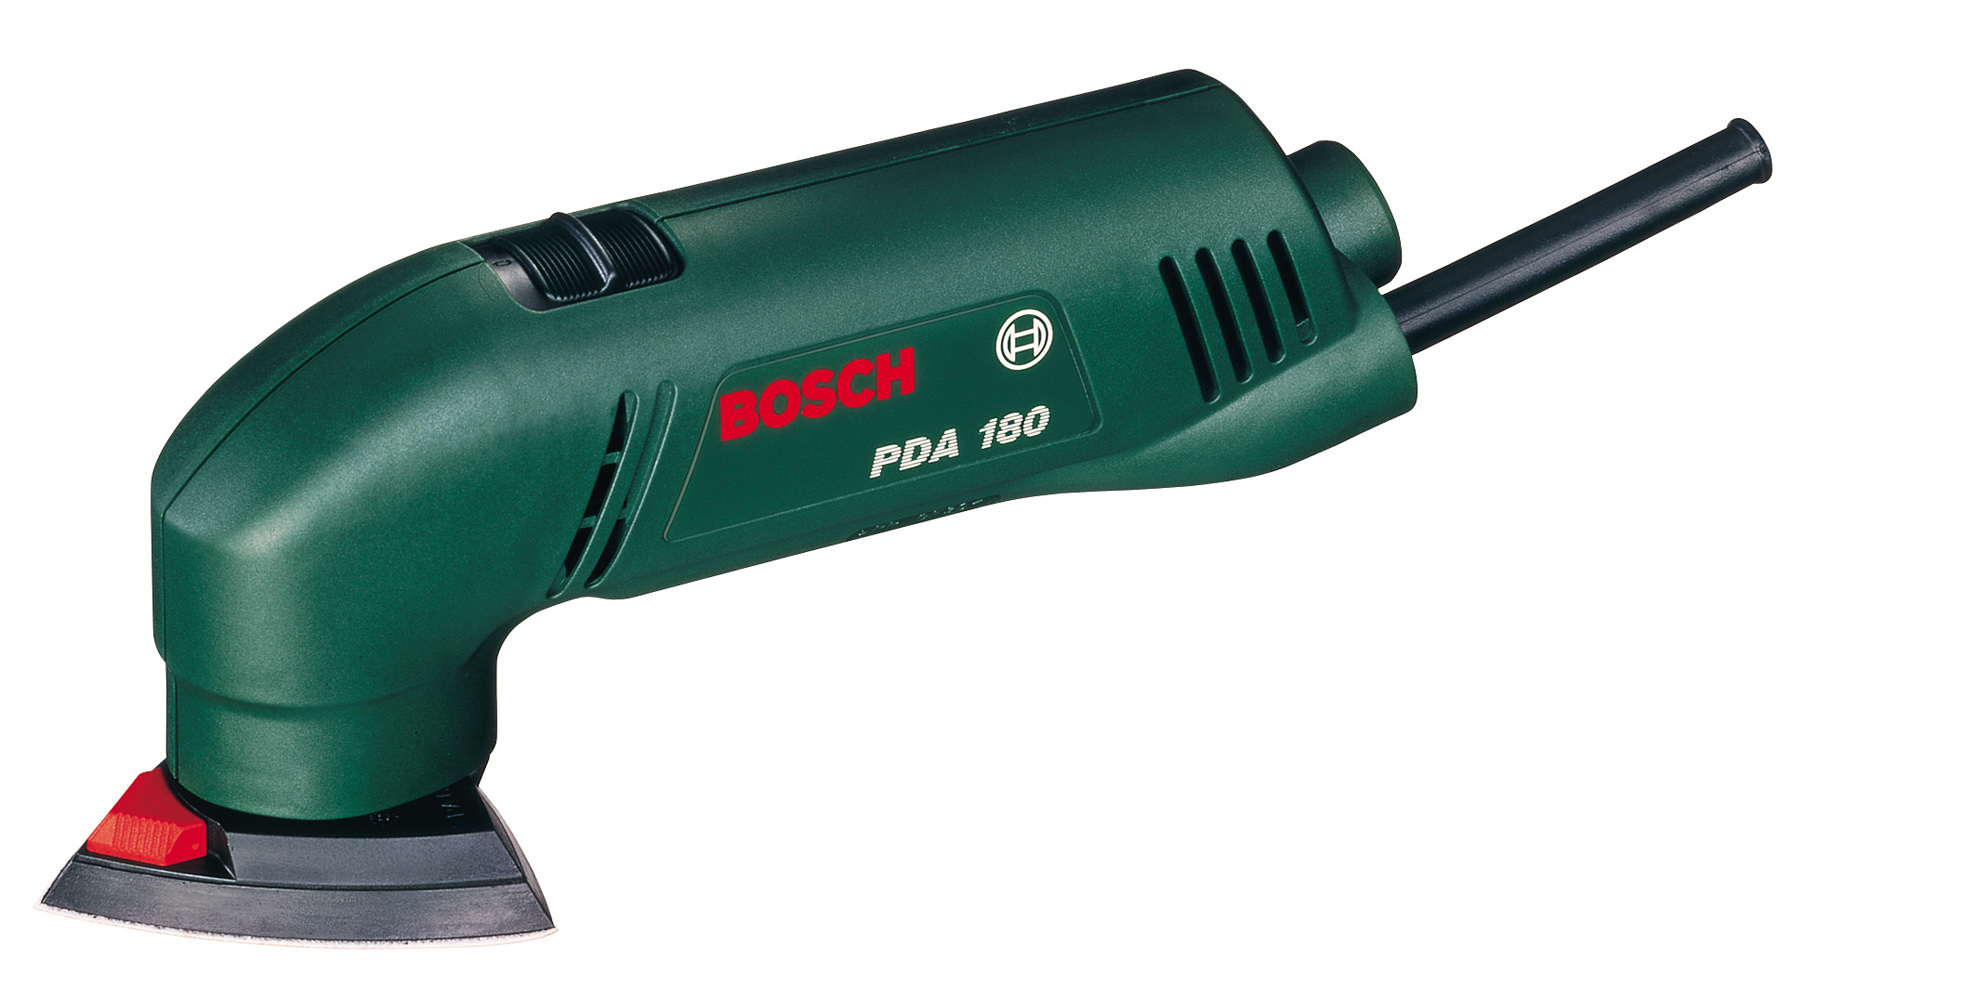 Ponceuse delta PDA 180 180W 92mm - BOSCH